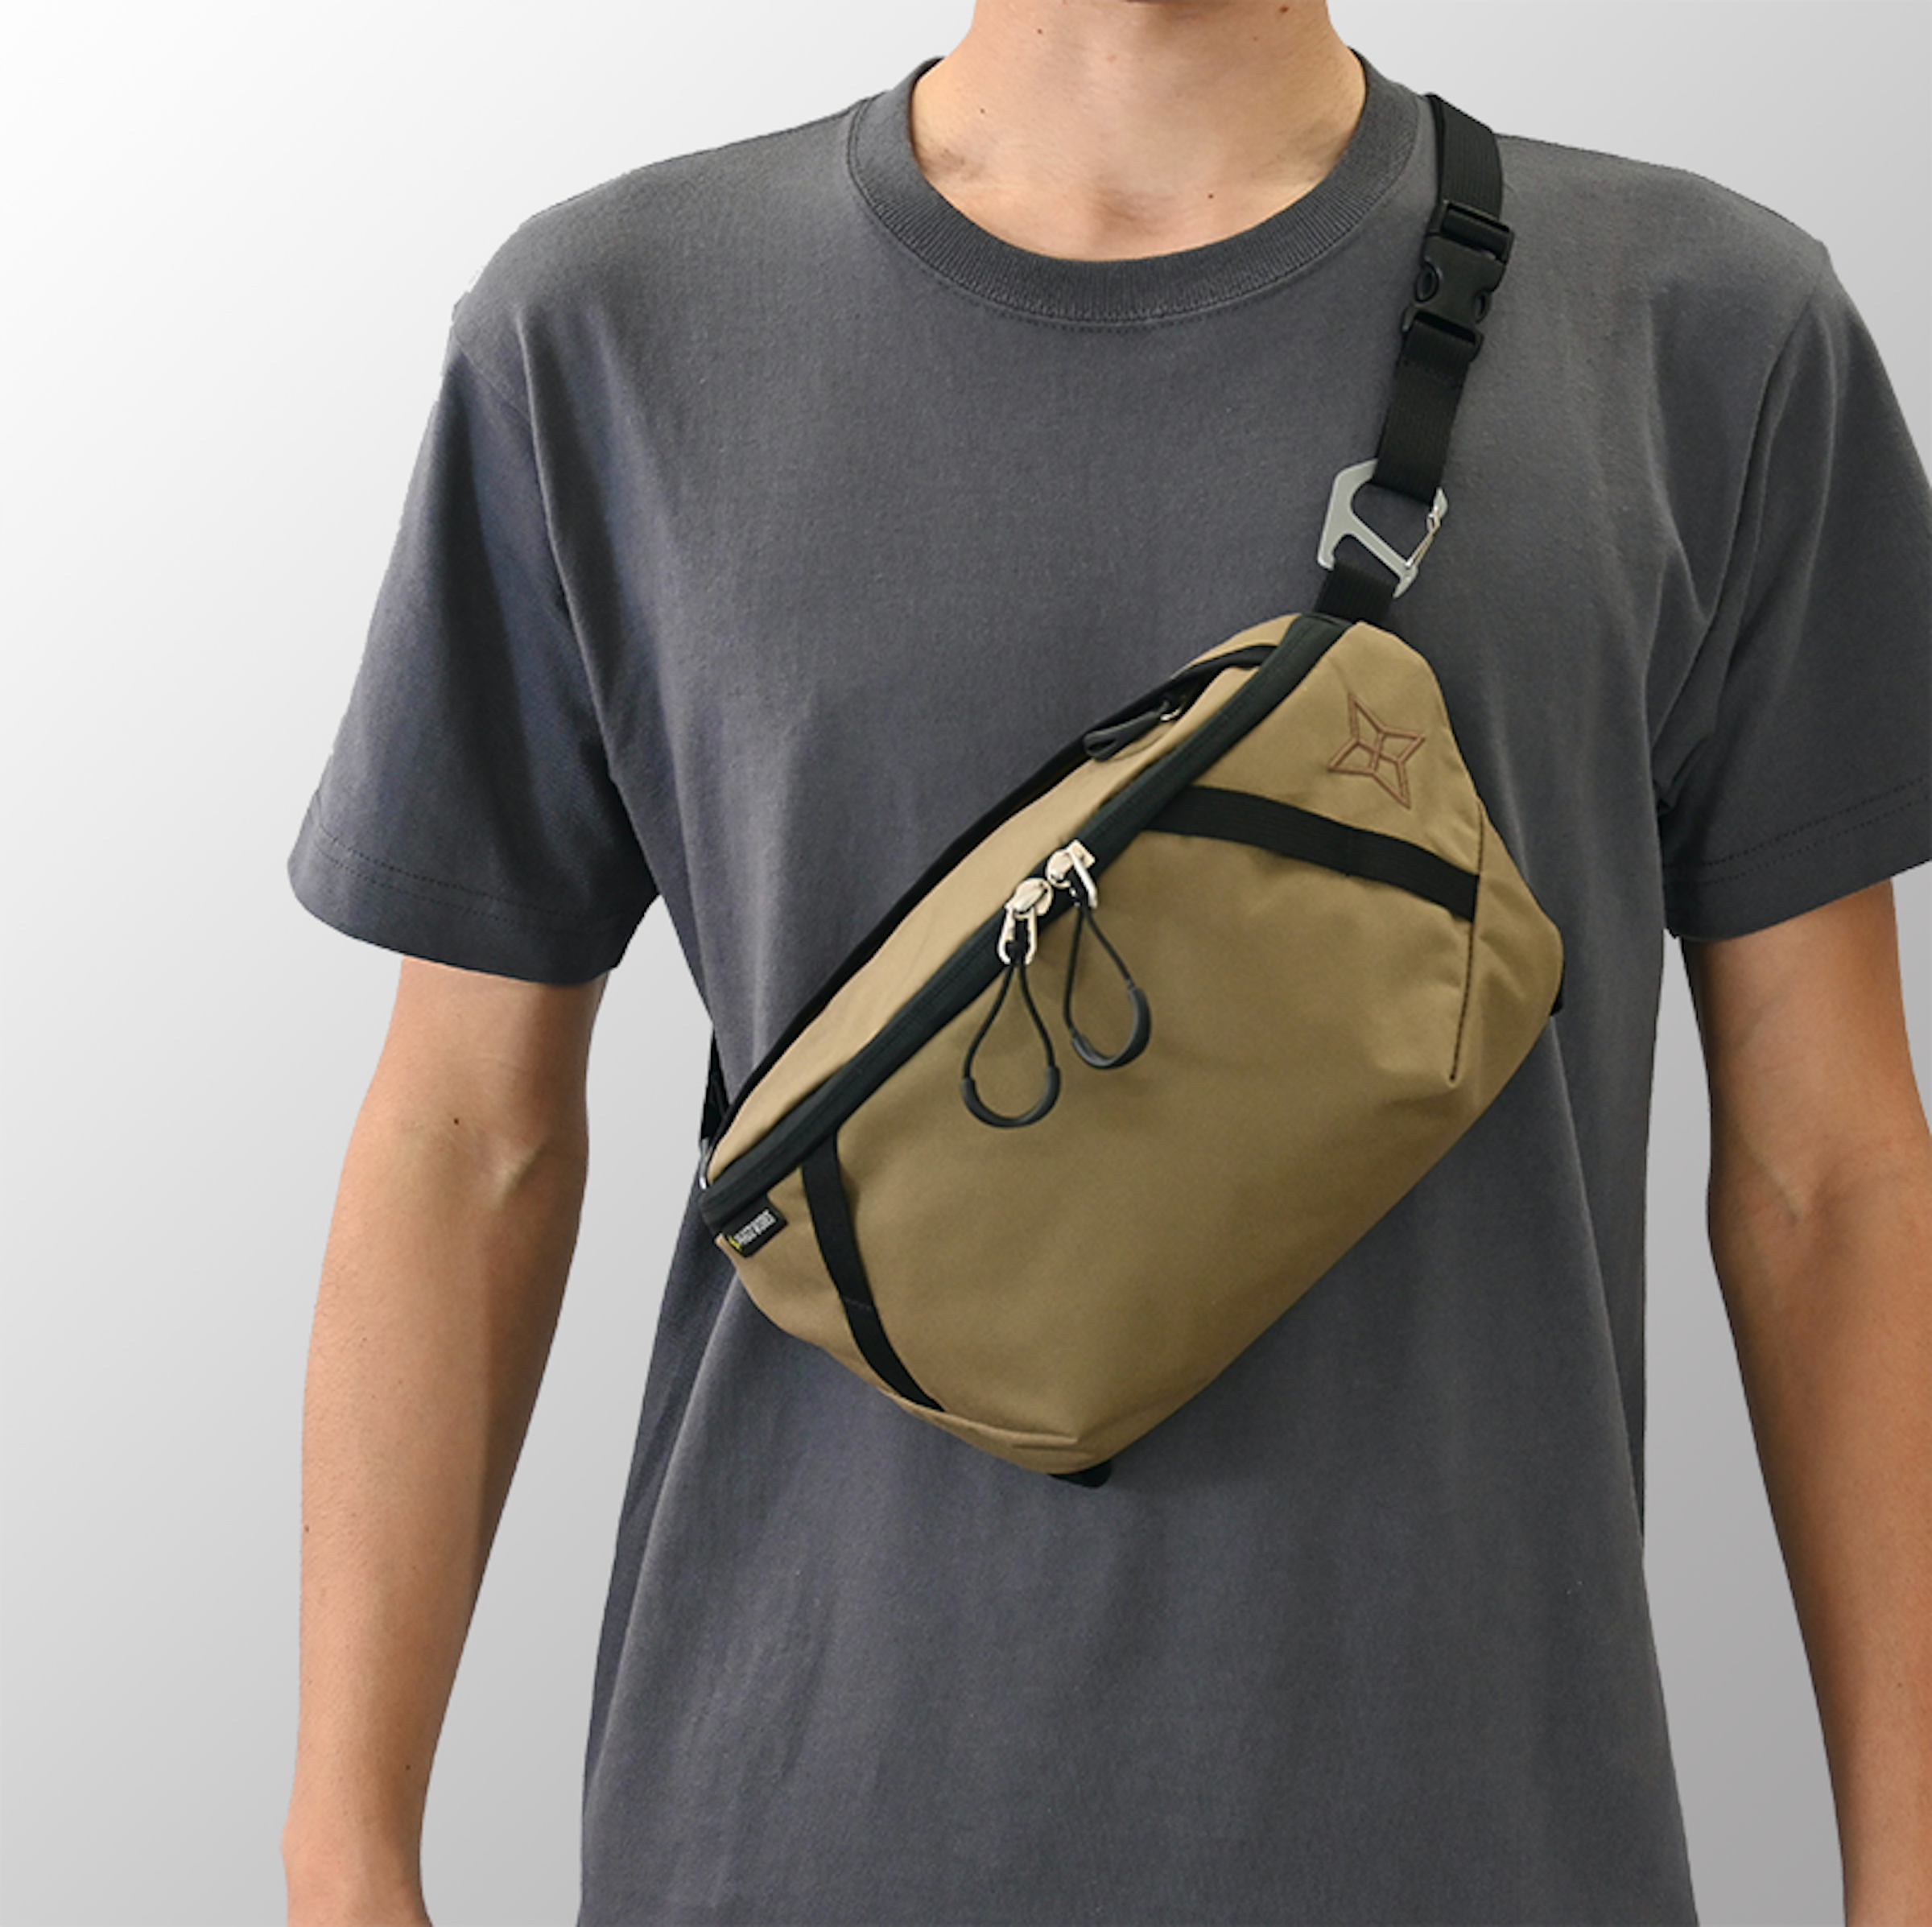 When worn over the shoulder with the included belt as a shoulder bag or body bag, it can hold more items than a satchel and provides stability as the center of gravity is closer to the body.